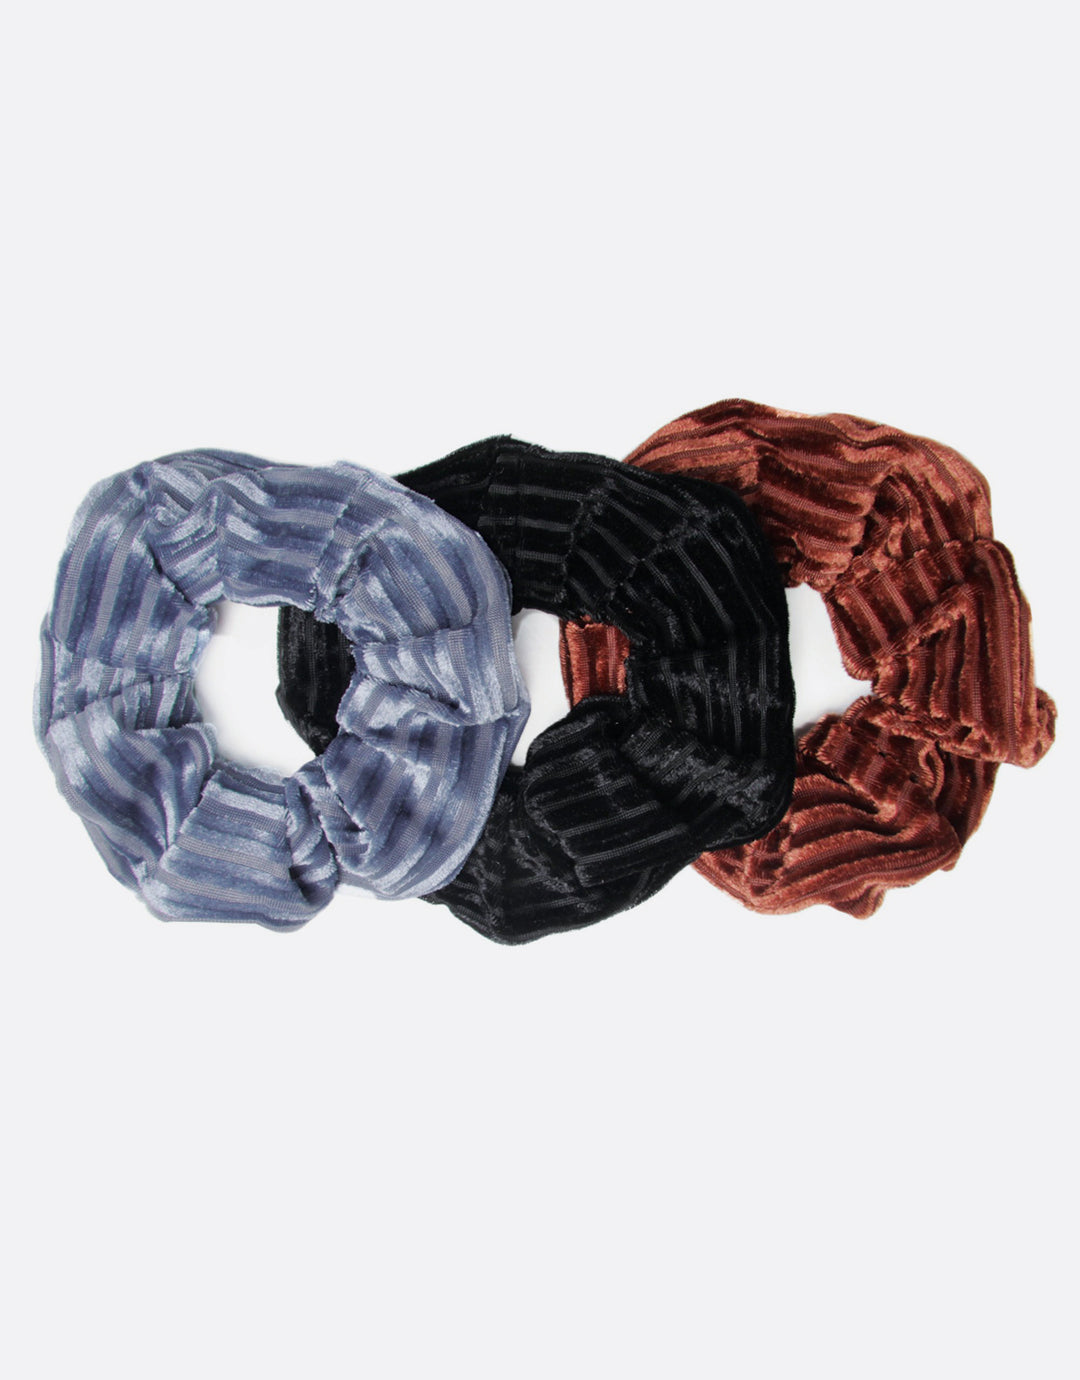 BANDED Women’s Premium Hair Accessories - Seas the Day - 3 Pack Ribbed Velvet Scrunchies